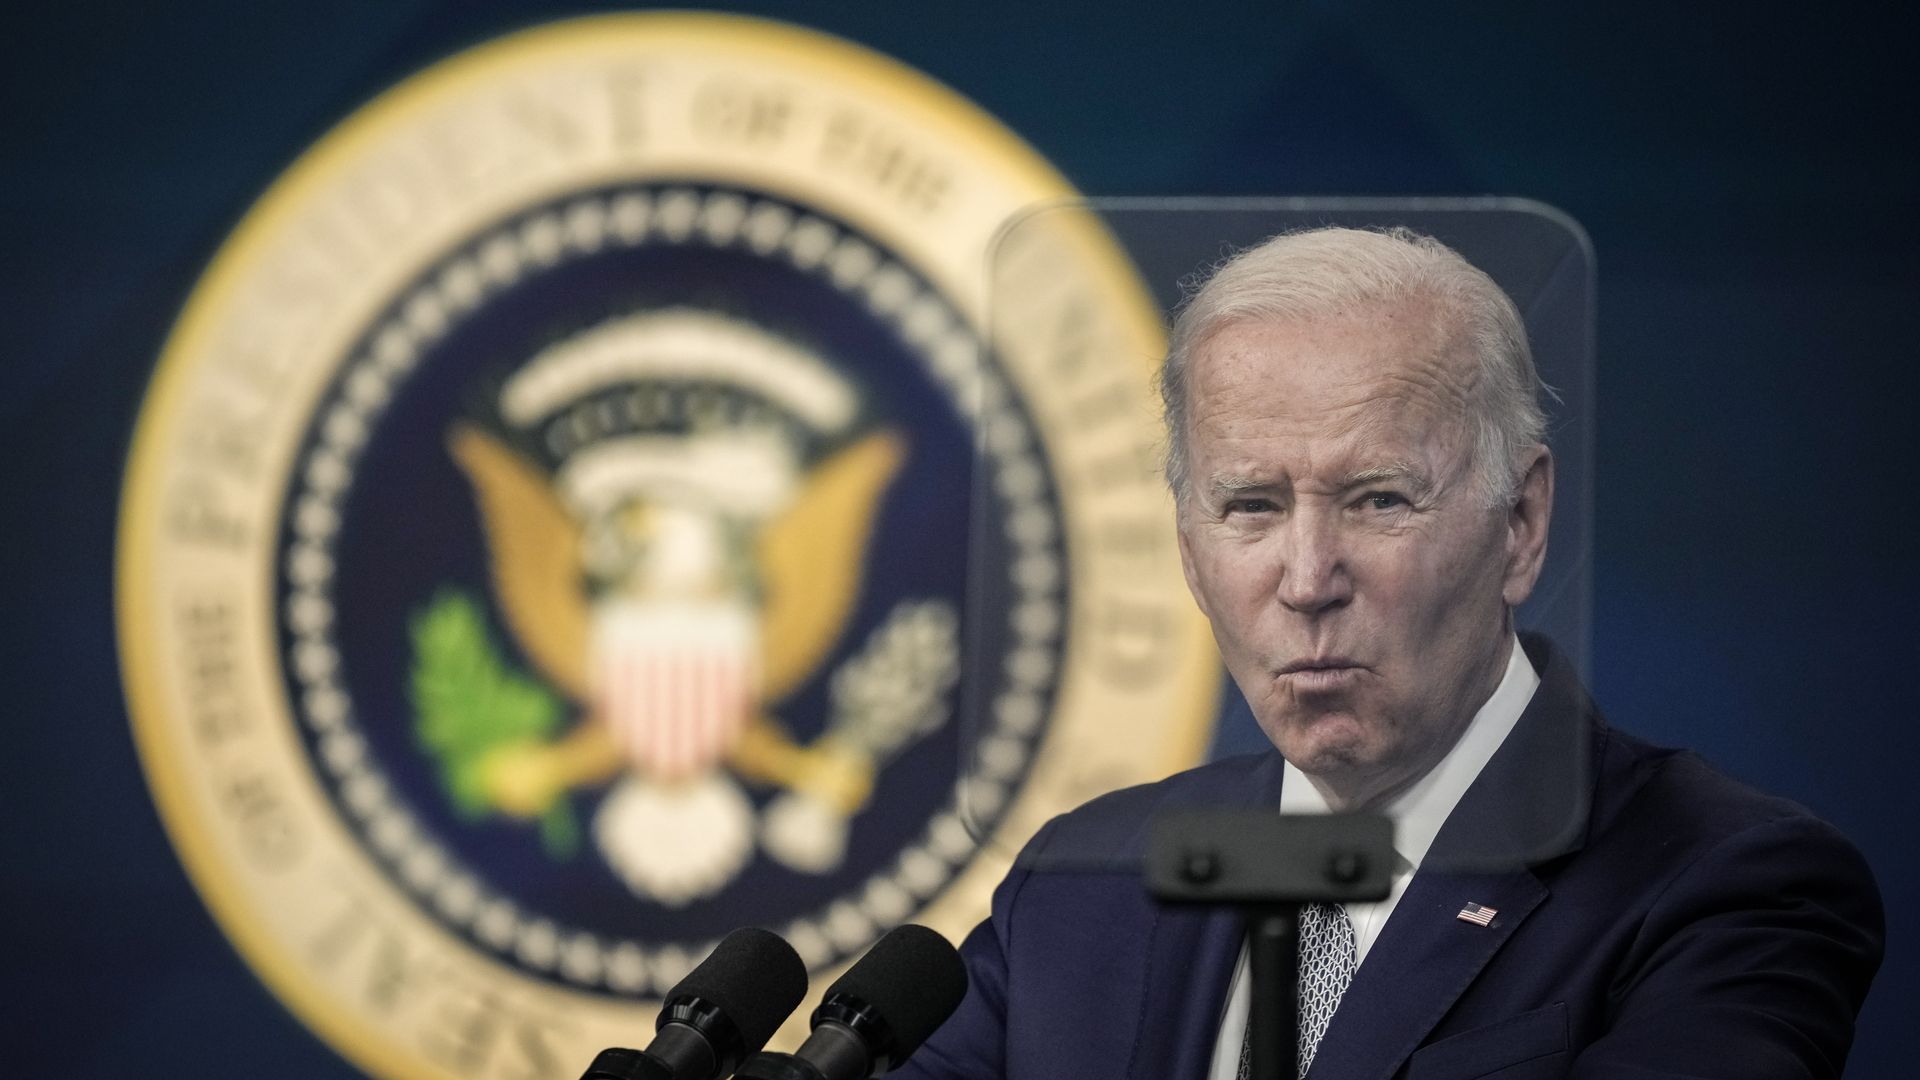 President Biden is seen through the pane of a TelePrompTer as he speaks Tuesday.